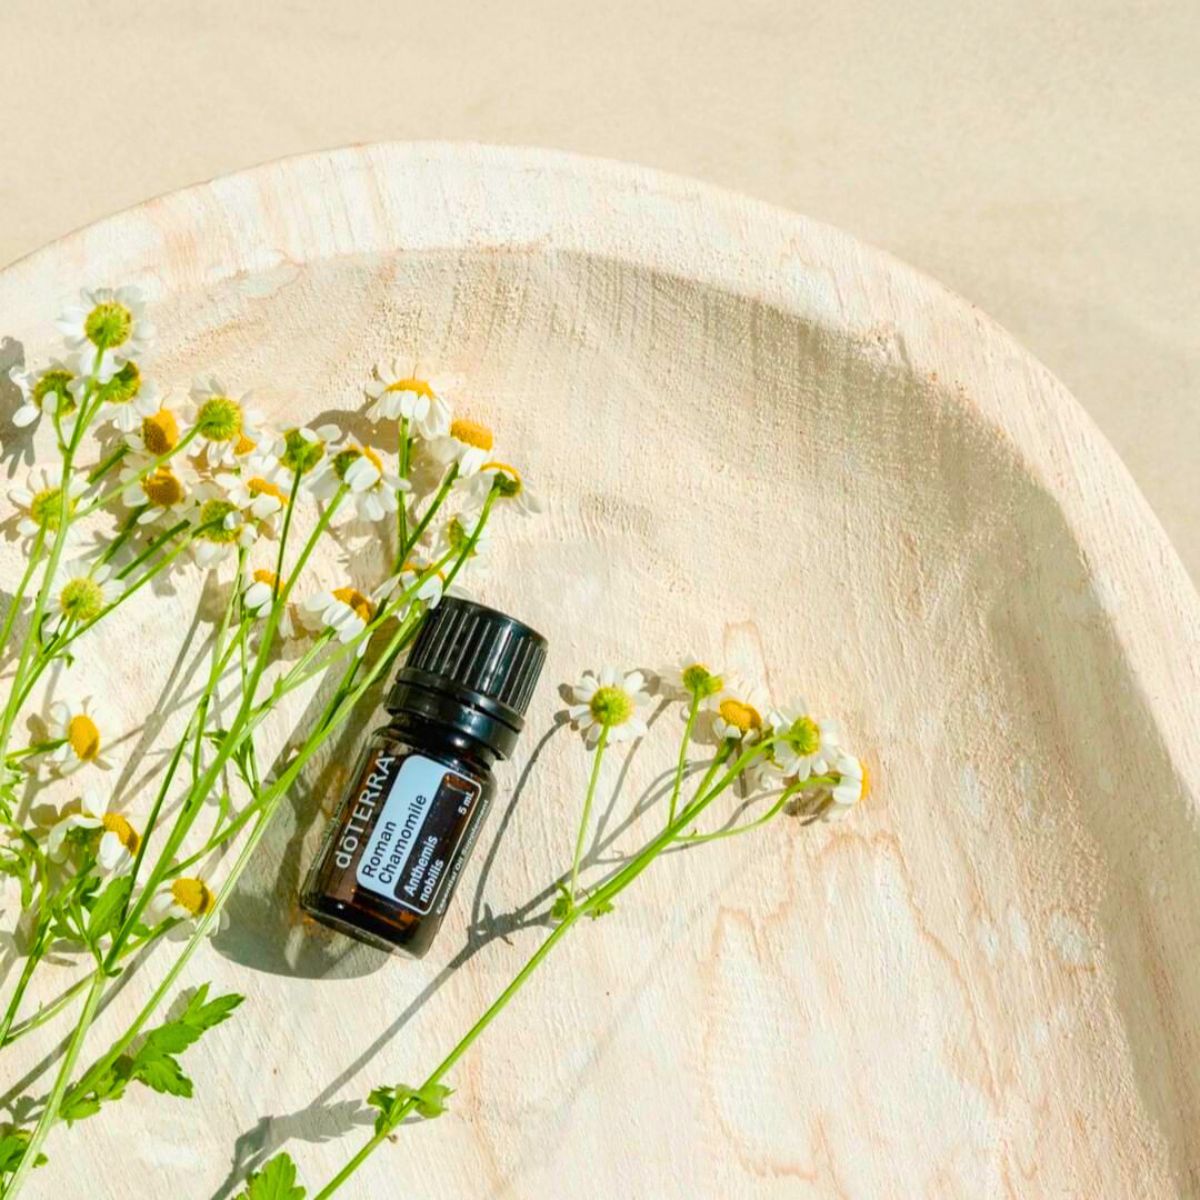 Chamomile oil by Doterra